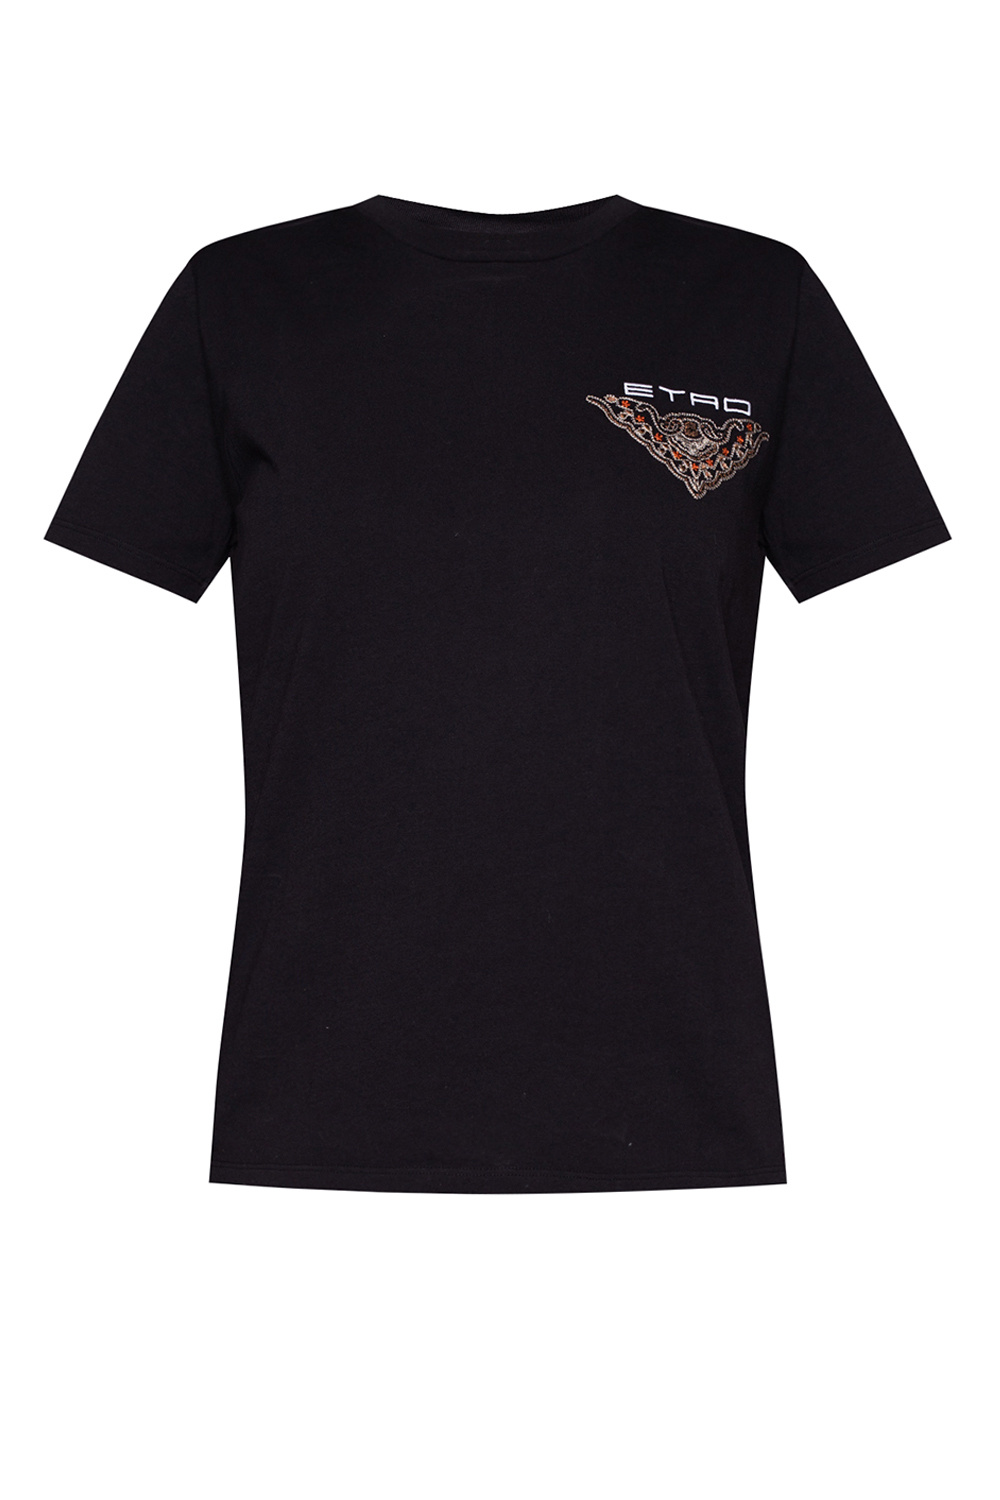 Etro Embroidered T-shirt | Women's Clothing | IetpShops